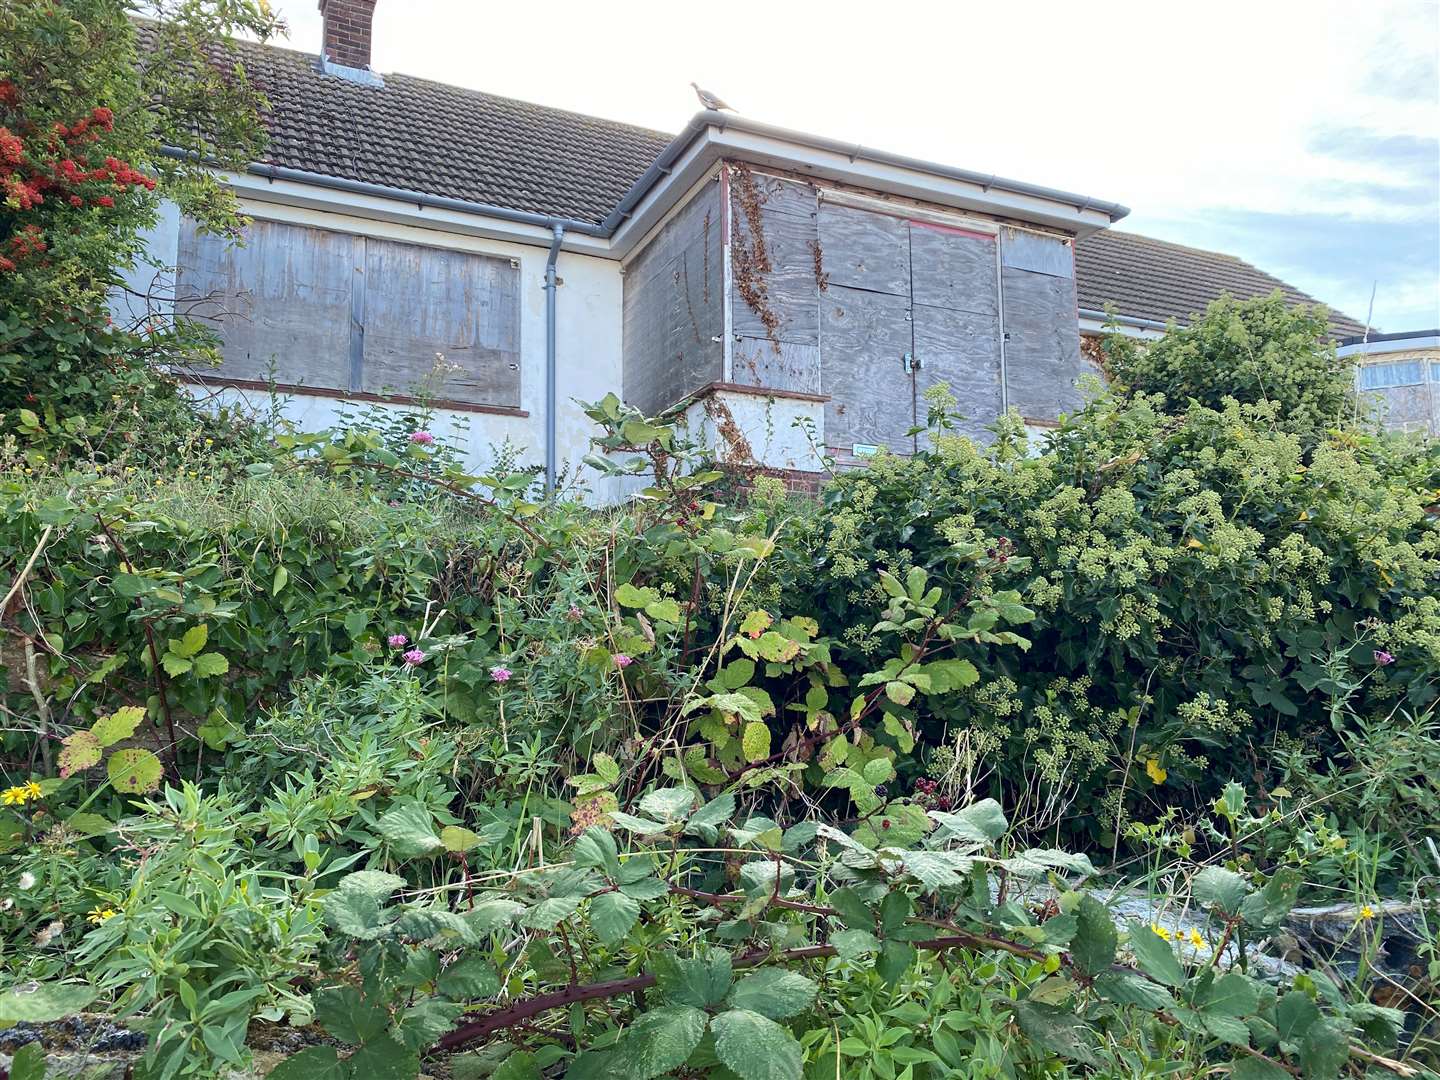 Neighbours describe the Herne Bay house as “horrible”, “an eyesore” and “a waste”